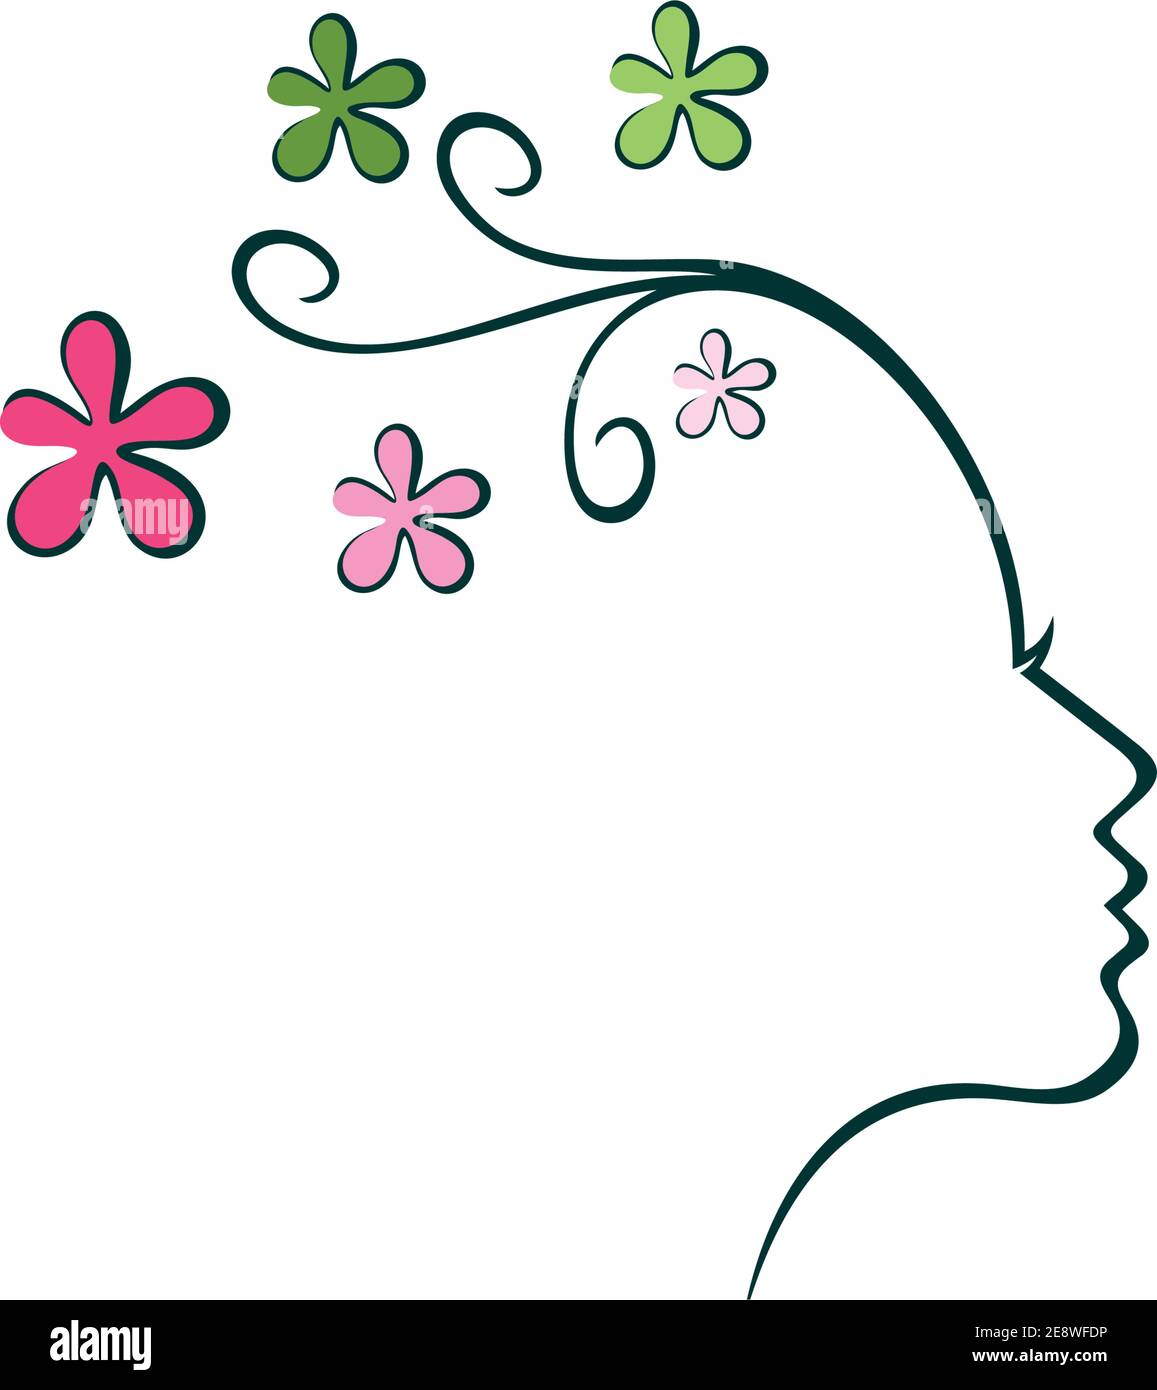 woman beauty abstract flowers icon logo concept graphic design Stock Vector